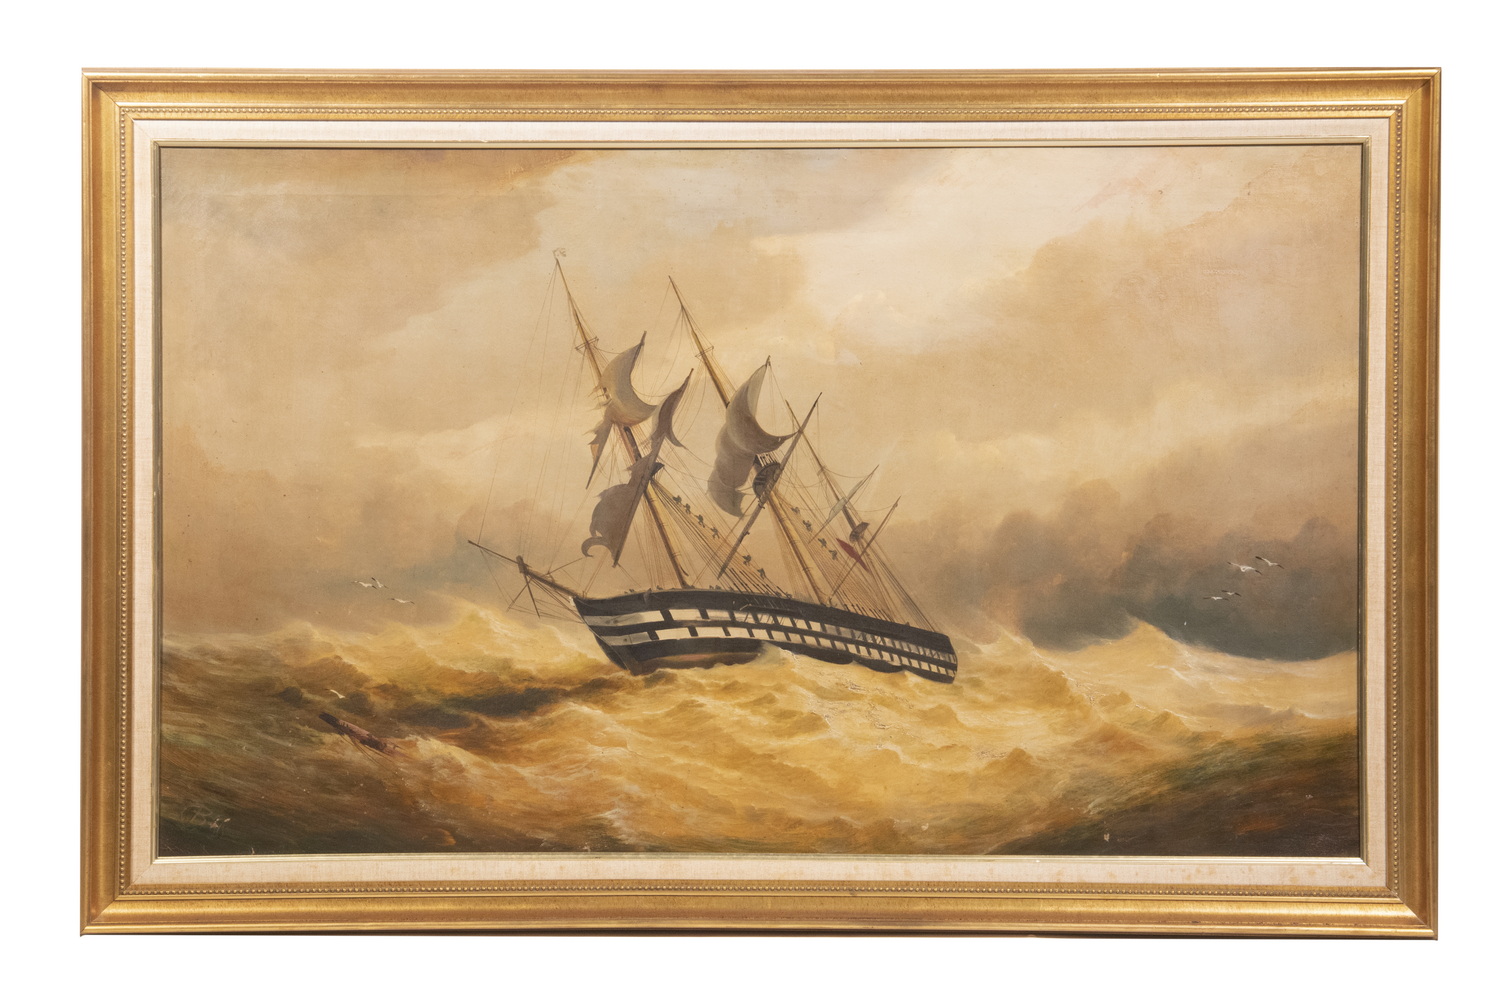 MONUMENTAL 19TH C. PAINTING OF SHIP